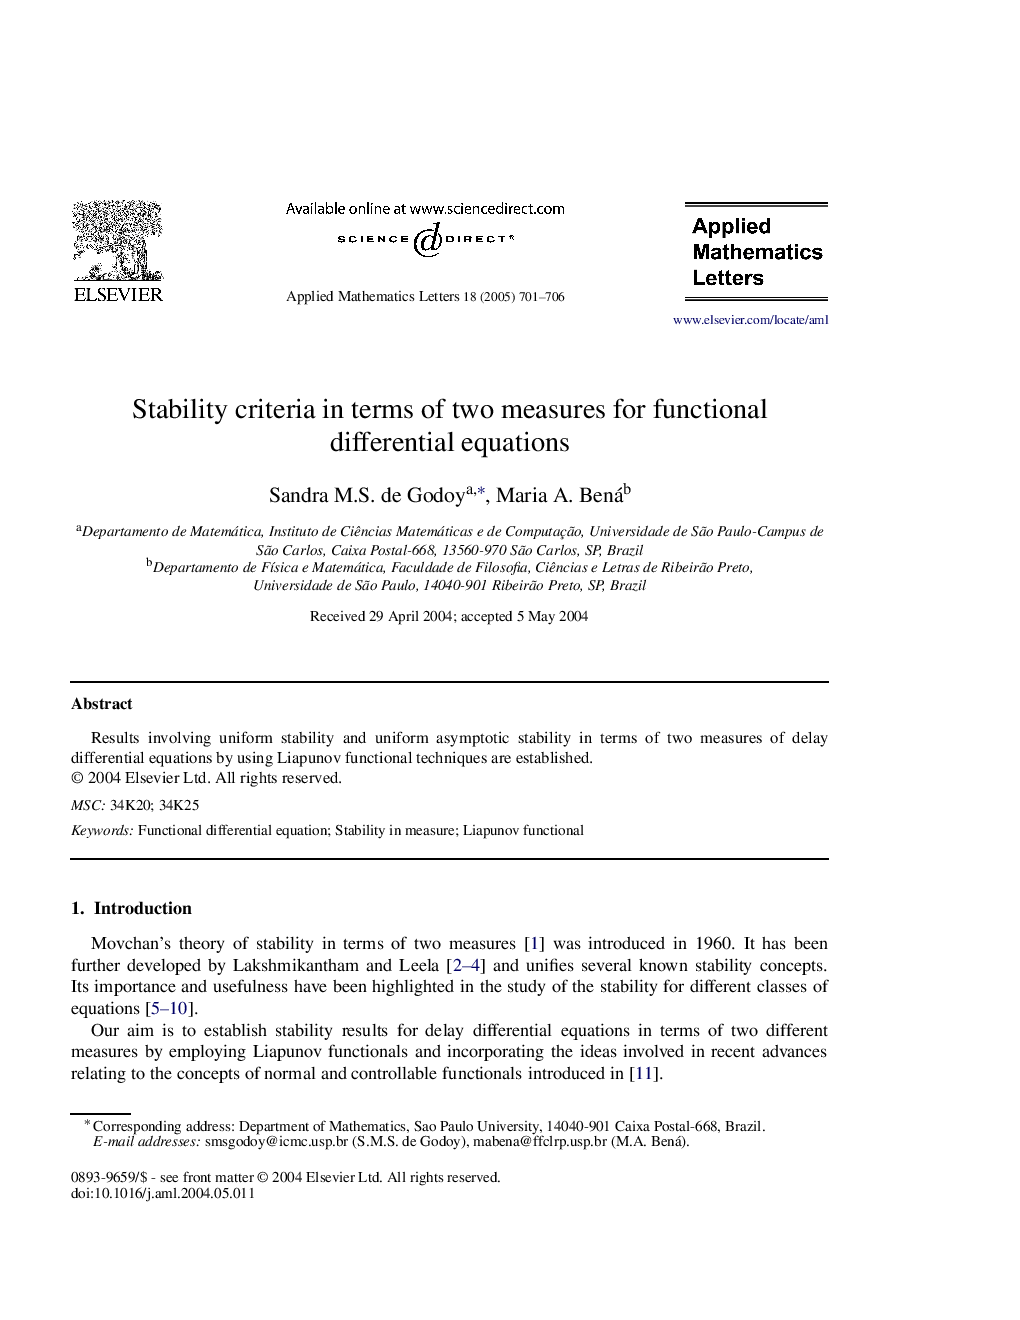 Stability criteria in terms of two measures for functional differential equations